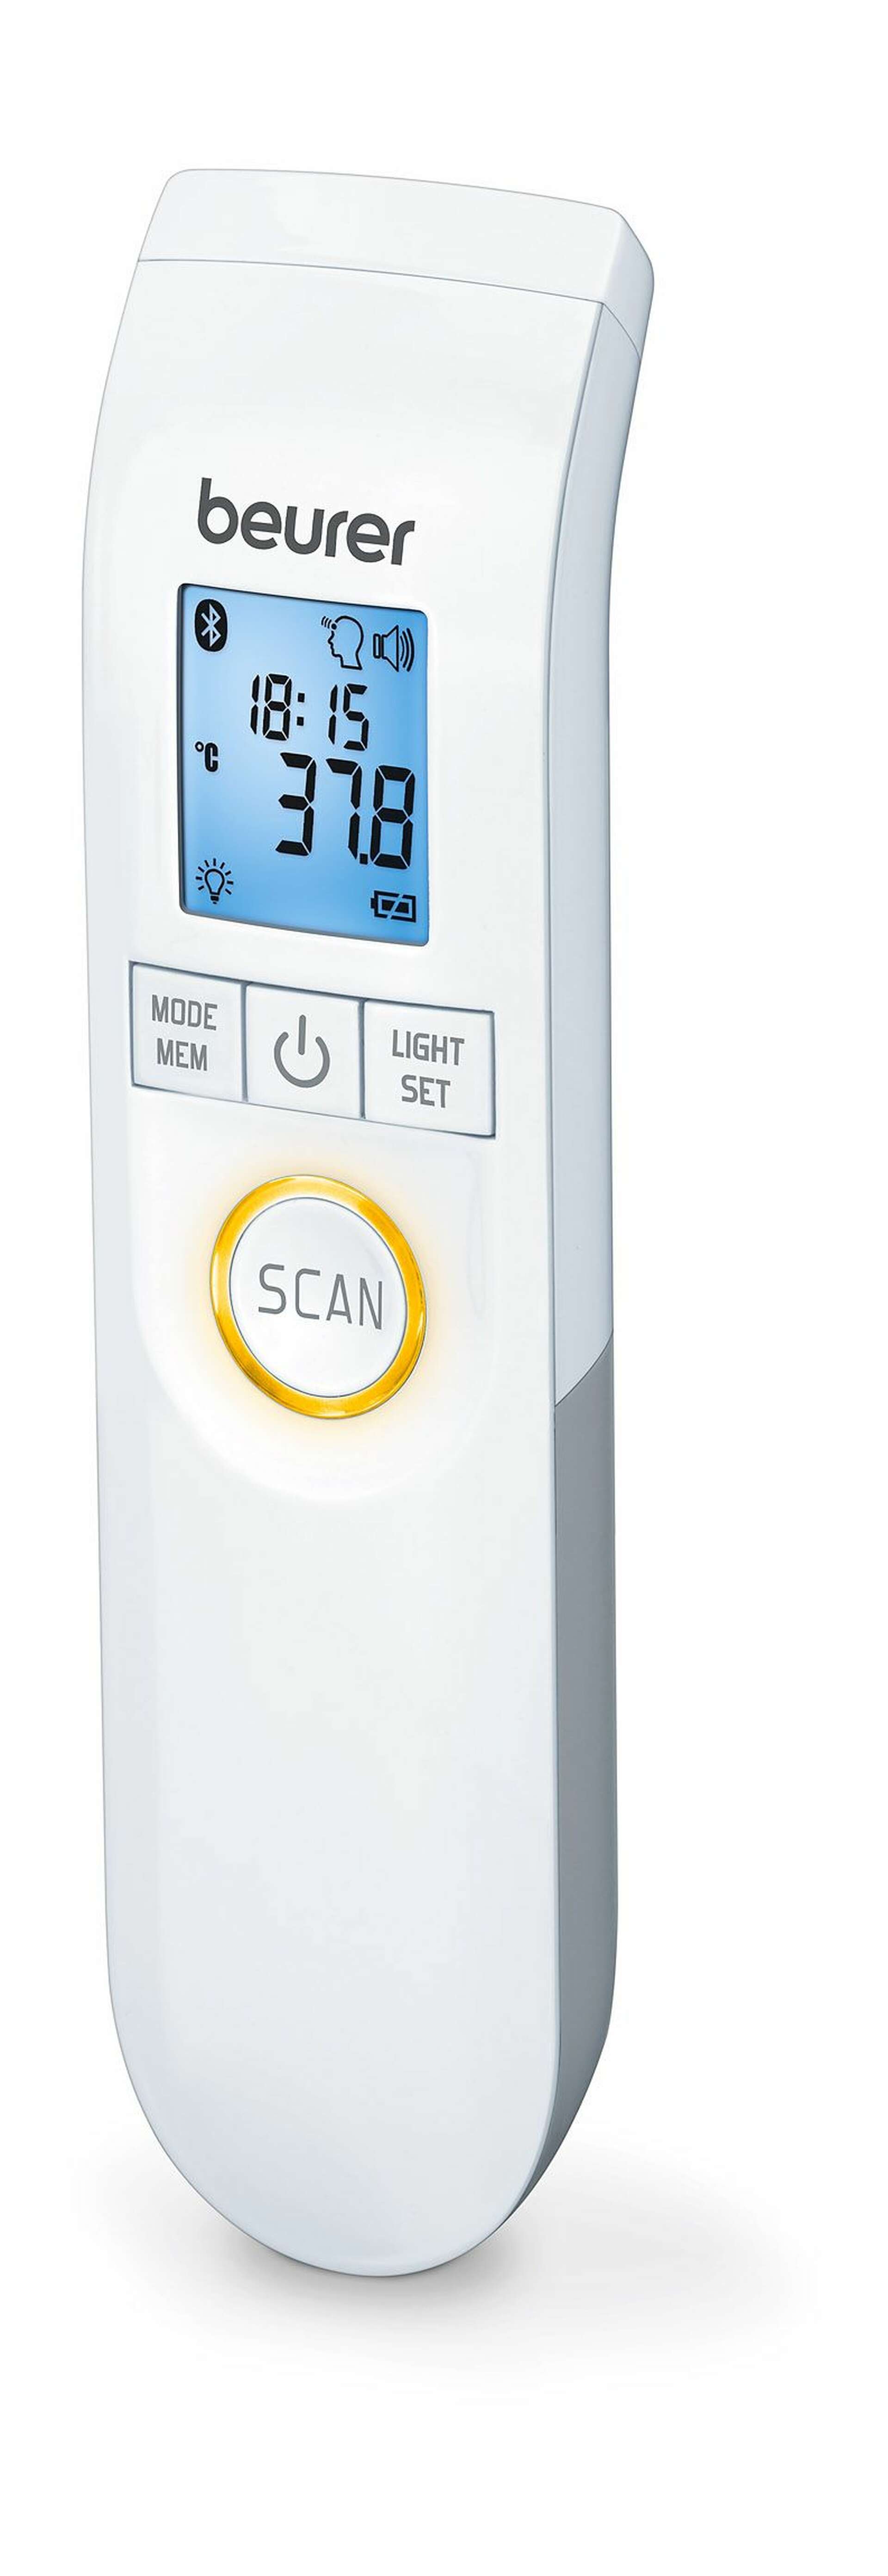 The Beurer FT95 thermometer displays different coloured lights depending on temperature